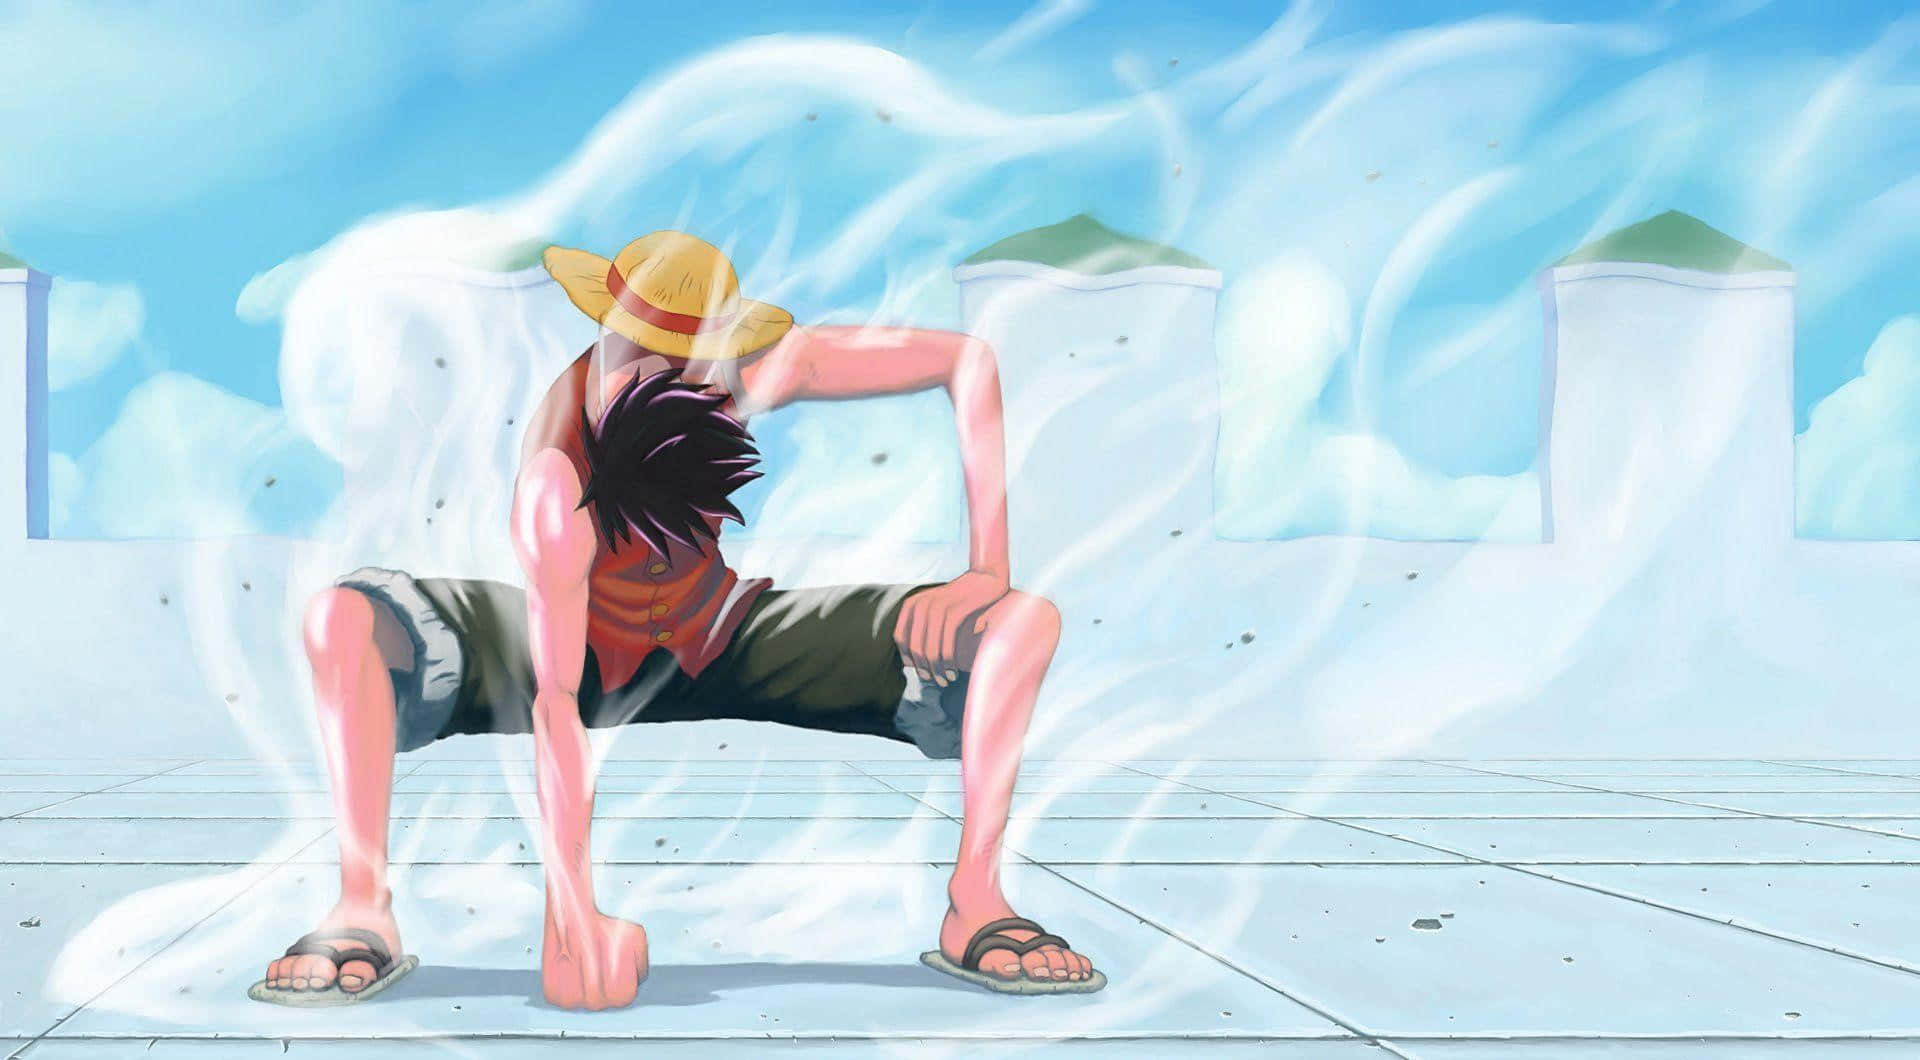 Take a trip to a world of adventure with the infamous Cool Luffy! Wallpaper